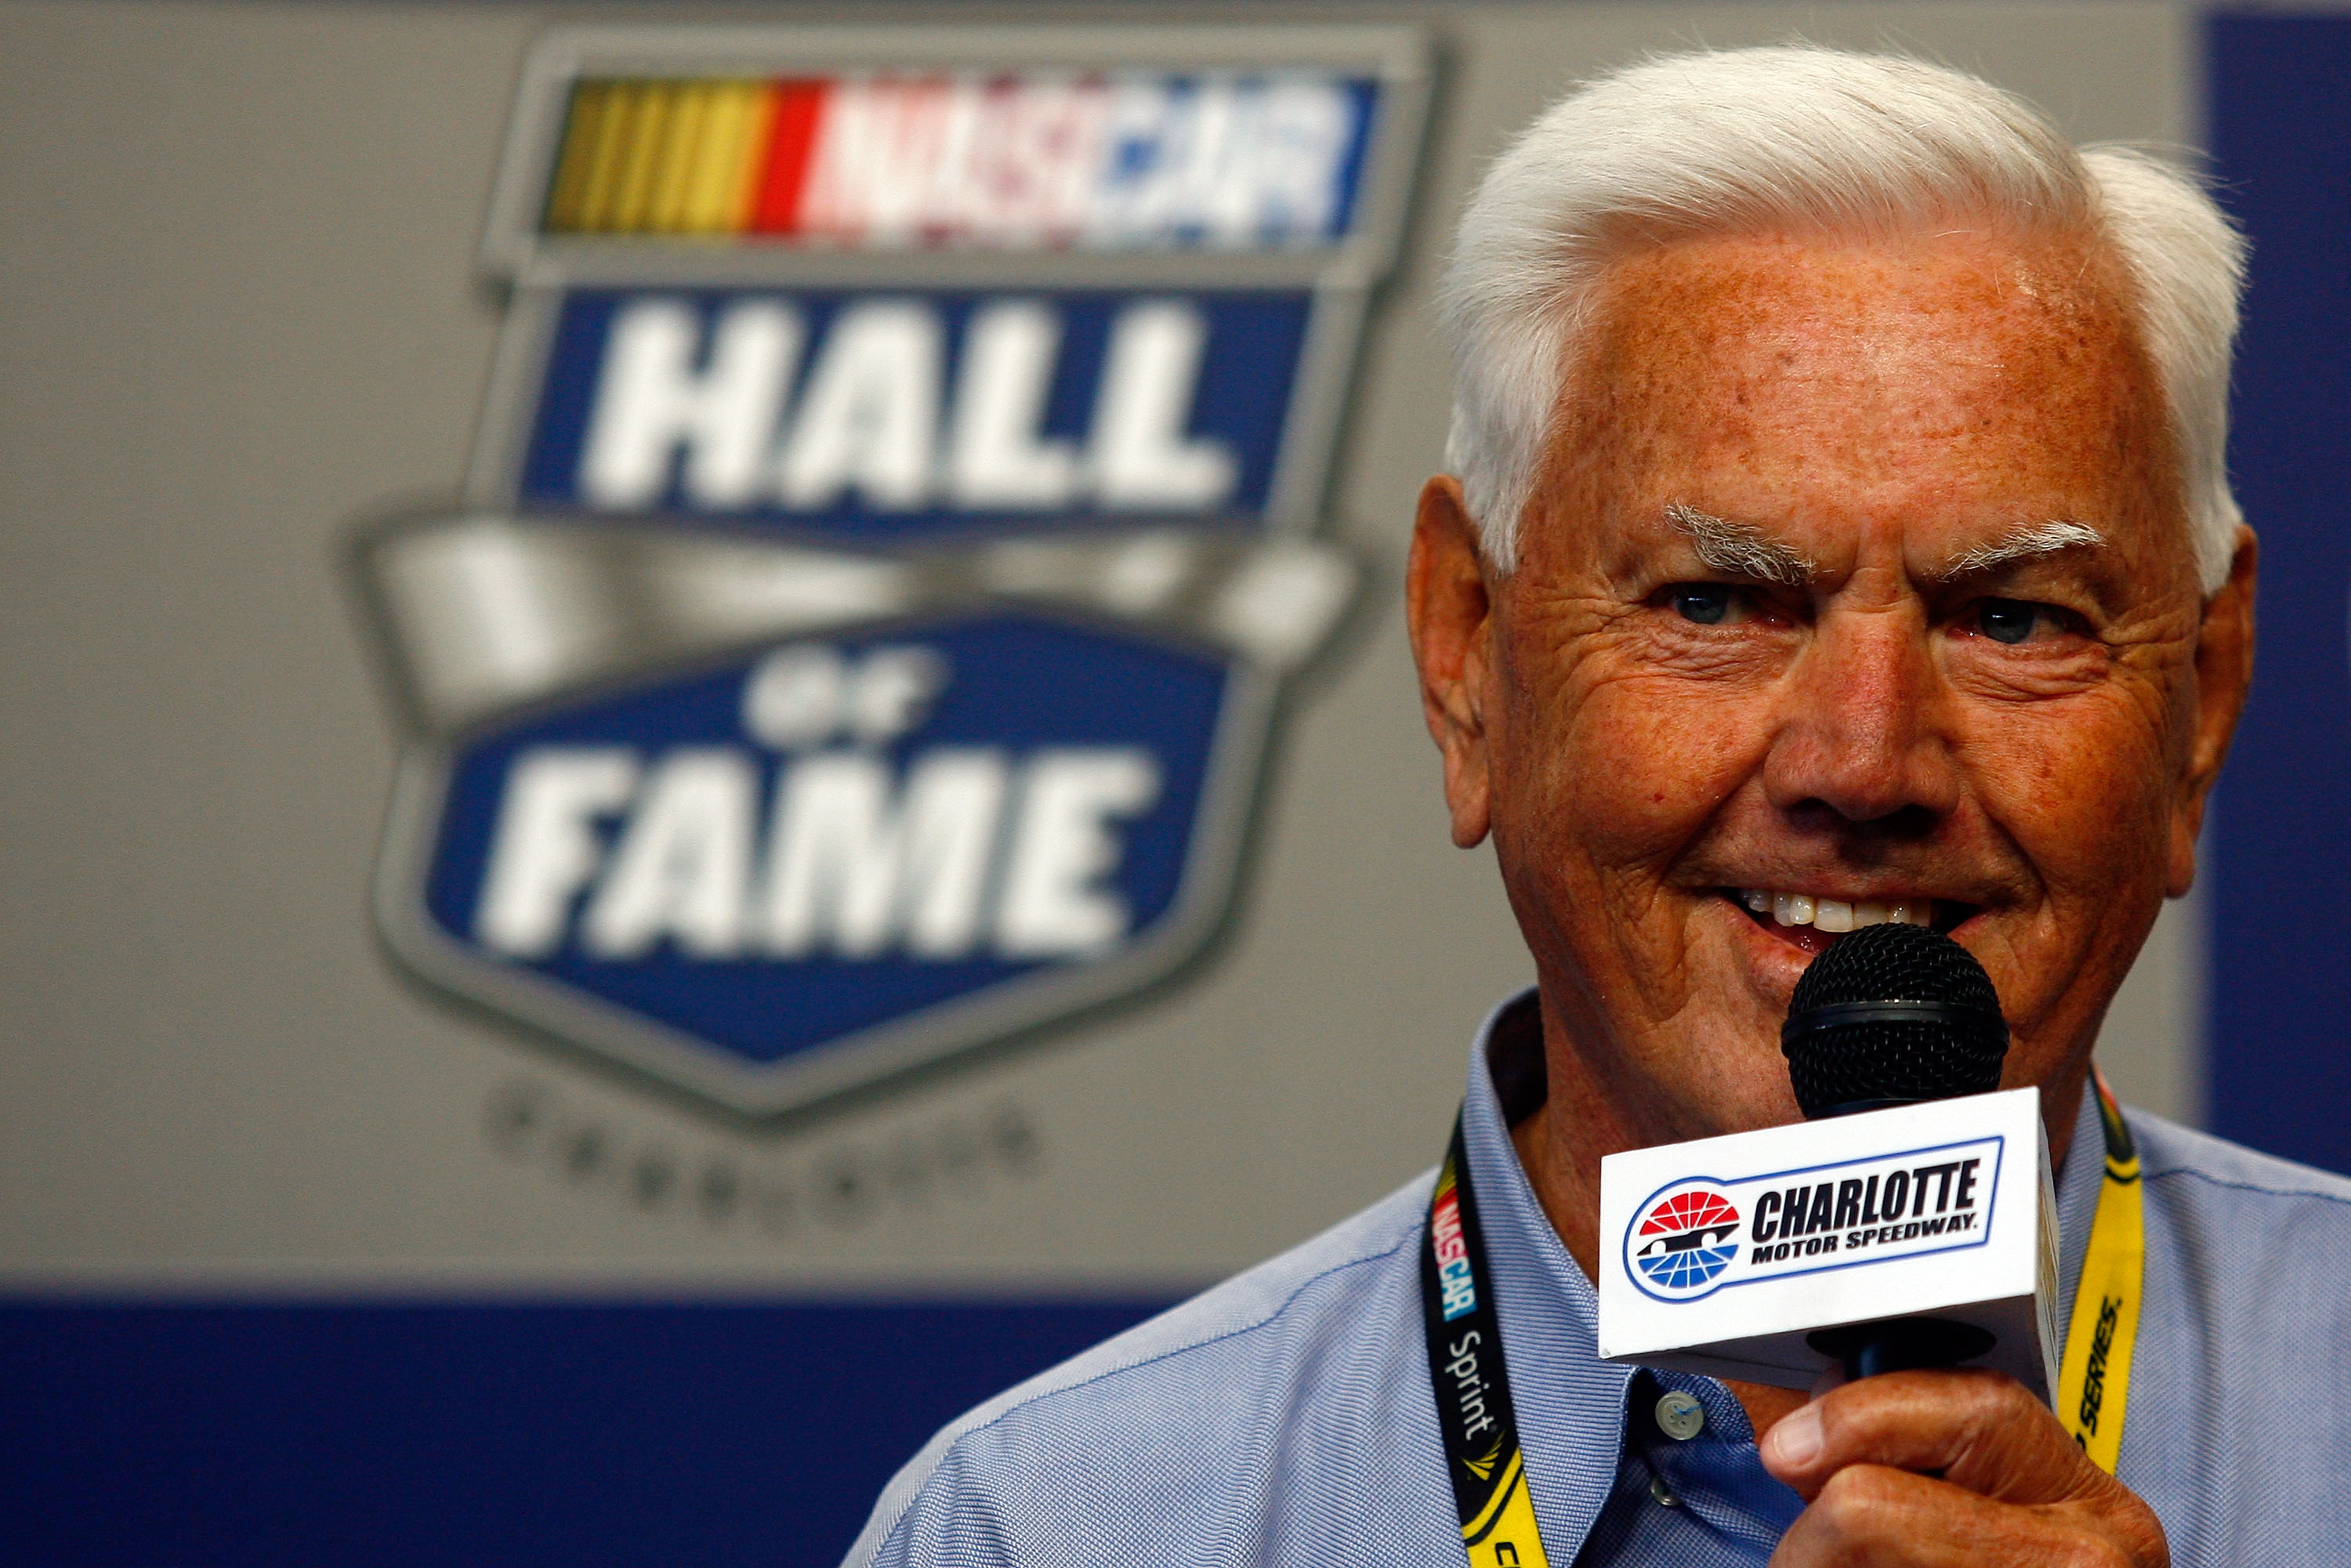 CONCORD, NC - MAY 22:  Former NASCAR driver Junior Johnson speaks to the media at Charlotte Motor Speedway on May 22, 2010 in Concord, North Carolina.  (Photo by Jason Smith/Getty Images for NASCAR)